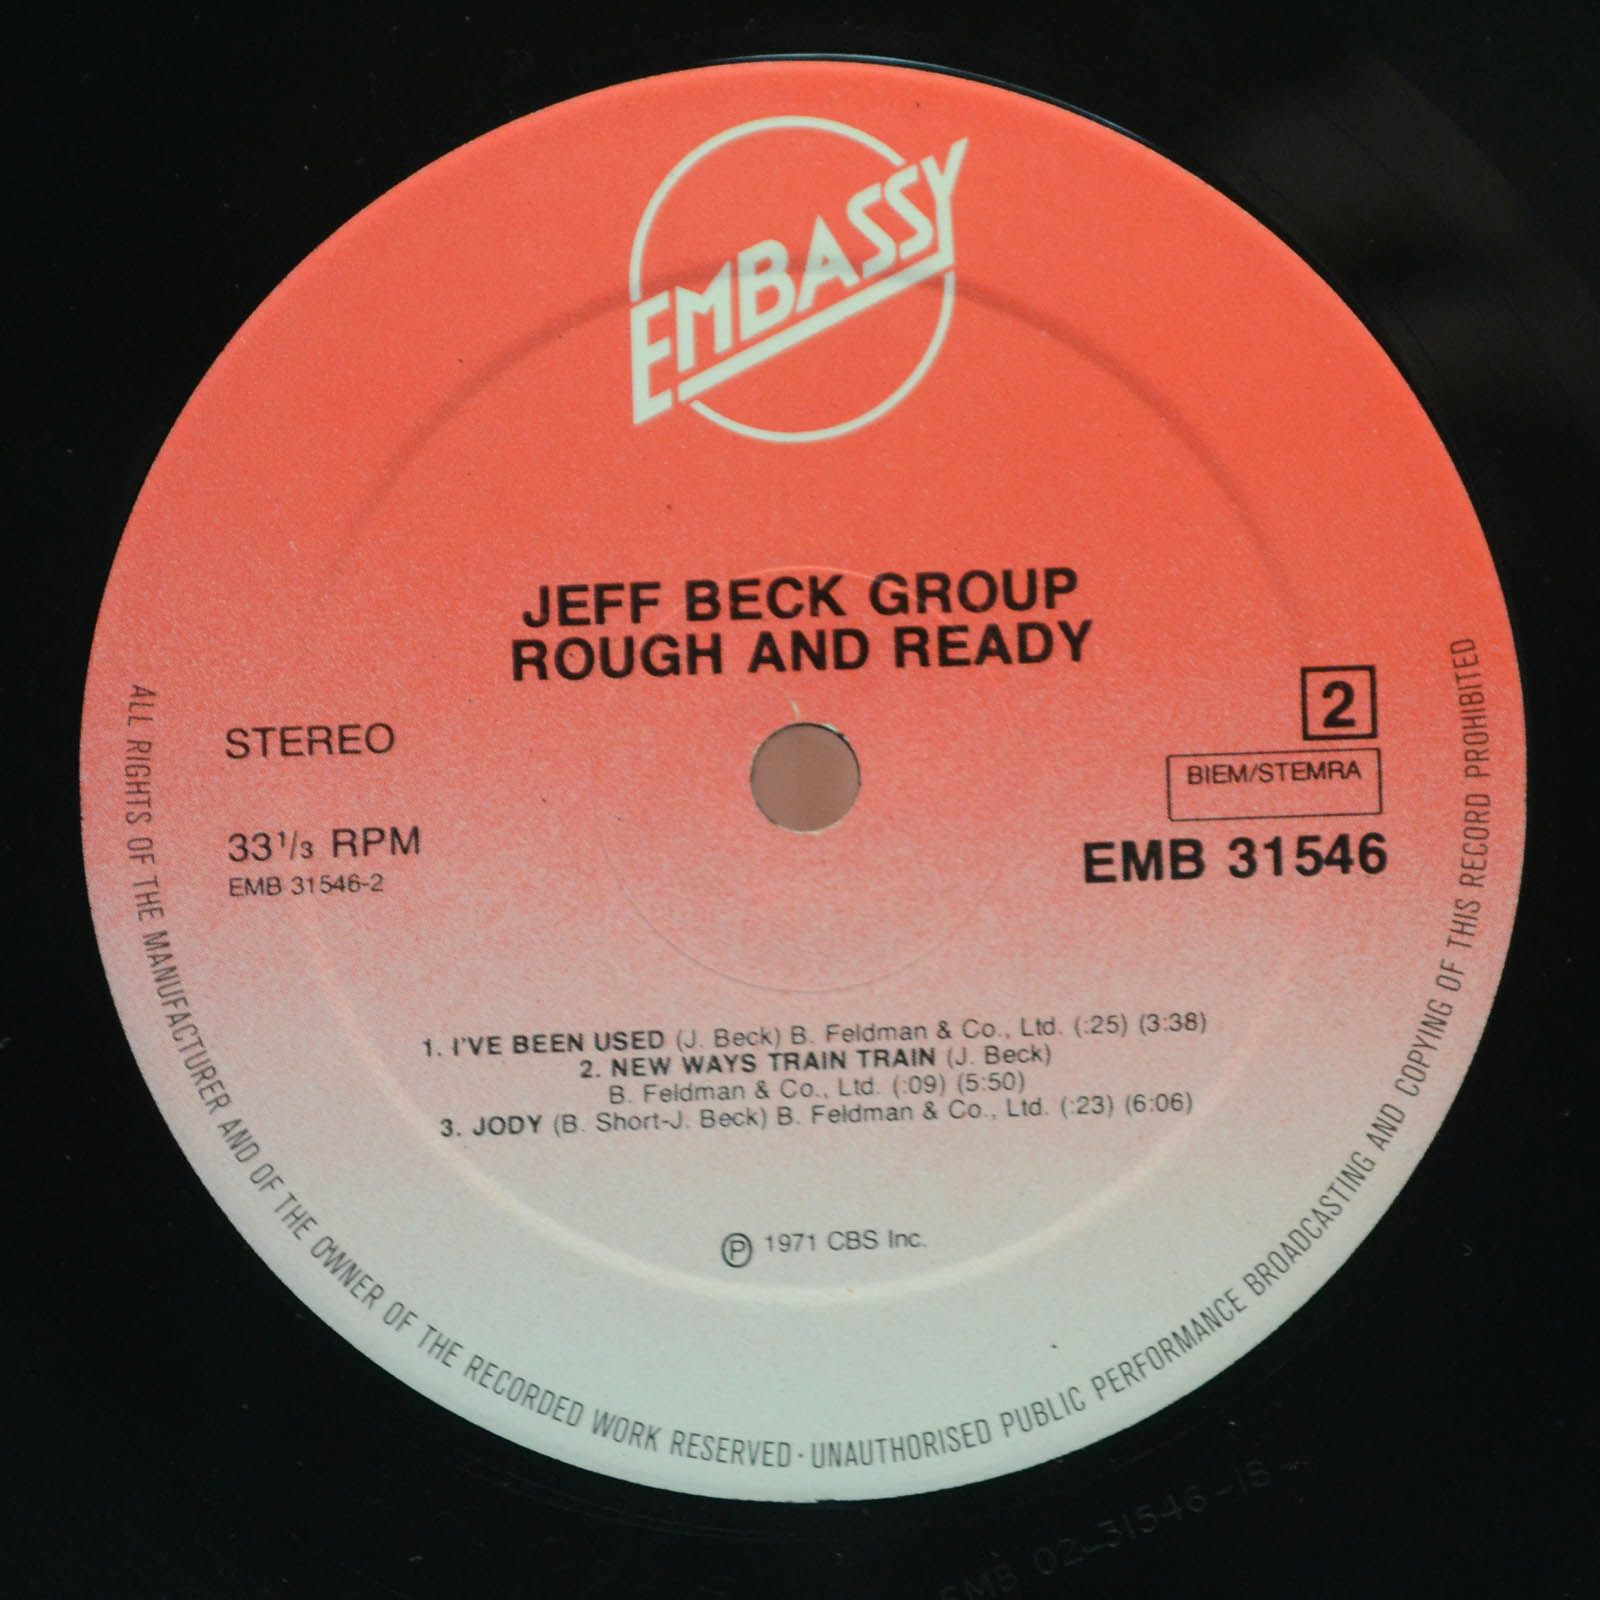 Jeff Beck Group — Rough And Ready, 1971